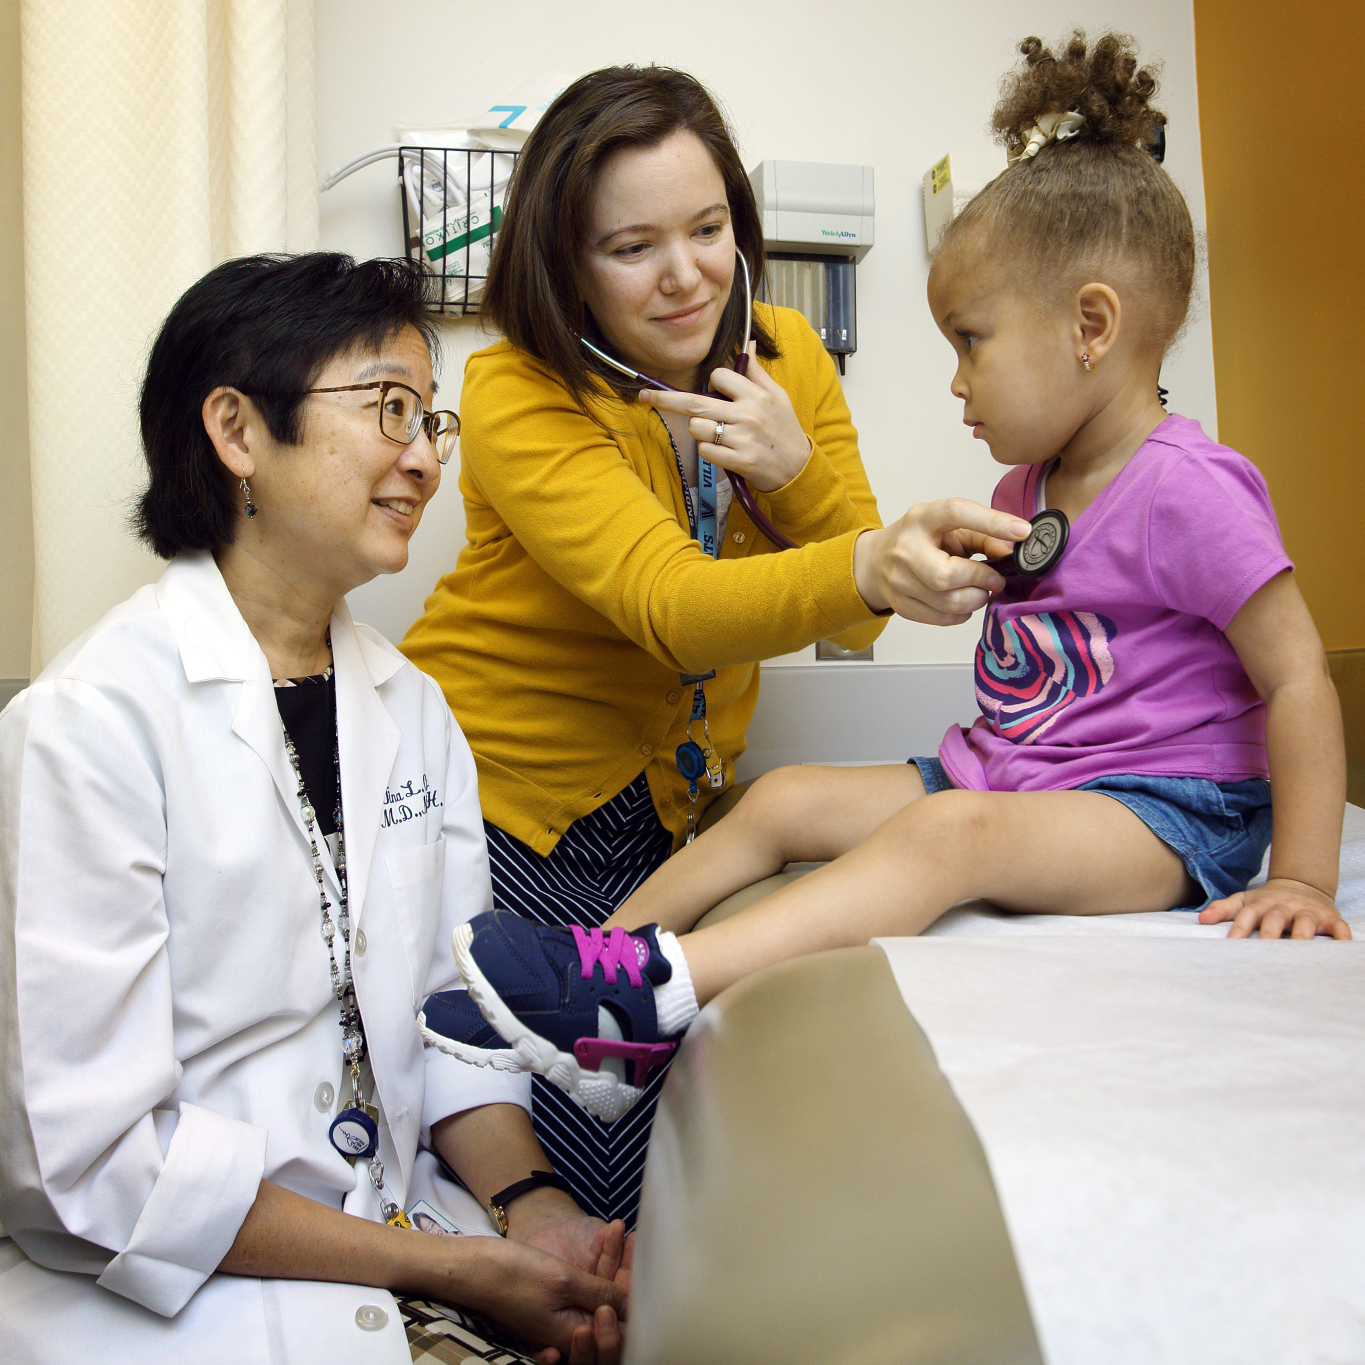 Tina Cheng with patient